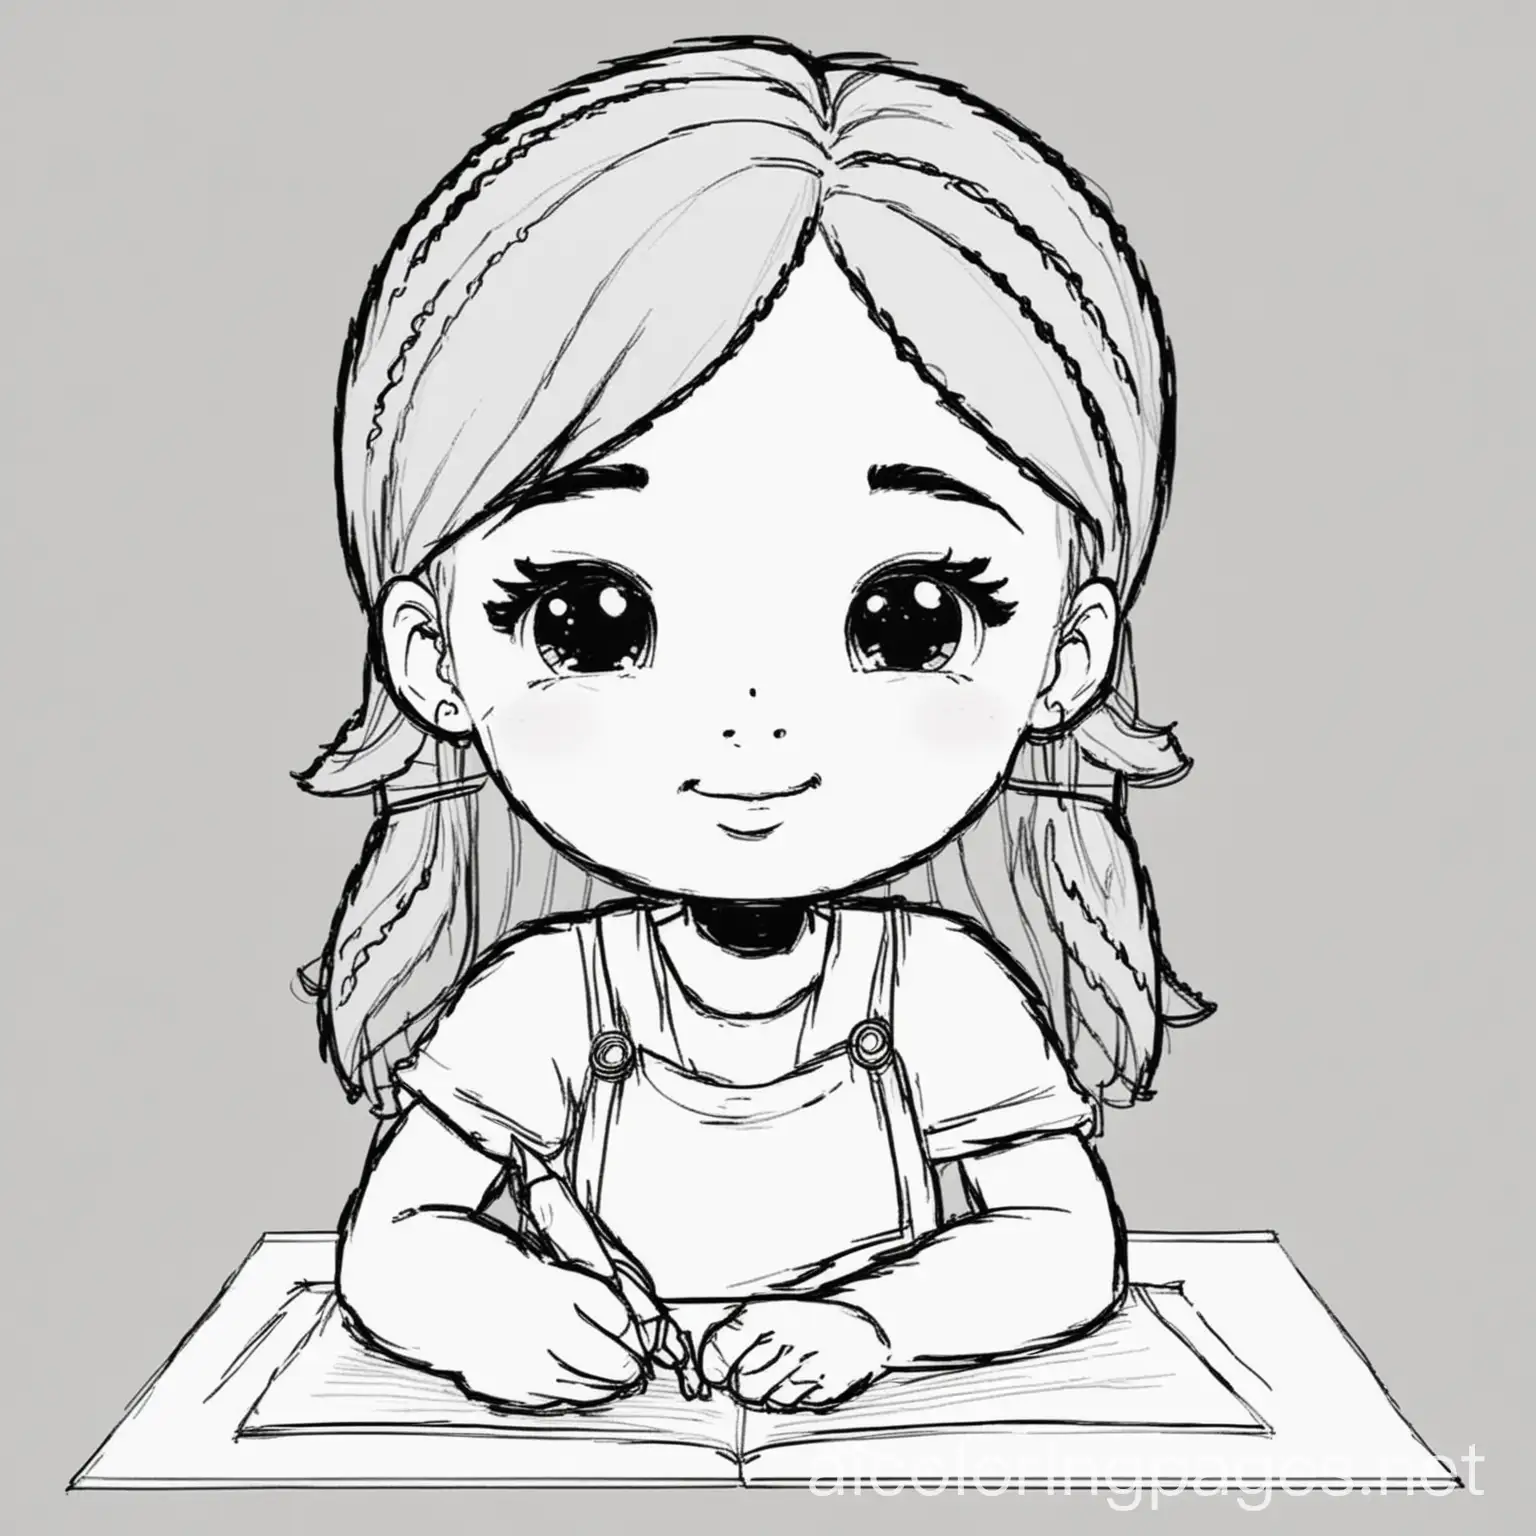 A cute little girl drawing without background, Coloring Page for young kids, Black and white, line art, white background, Simplicity, Ample White Space, Coloring Page, black and white, line art, white background, Simplicity, Ample White Space. The background of the coloring page is plain white to make it easy for young children to color within the lines. The outlines of all the subjects are easy to distinguish, making it simple for kids to color without too much difficulty